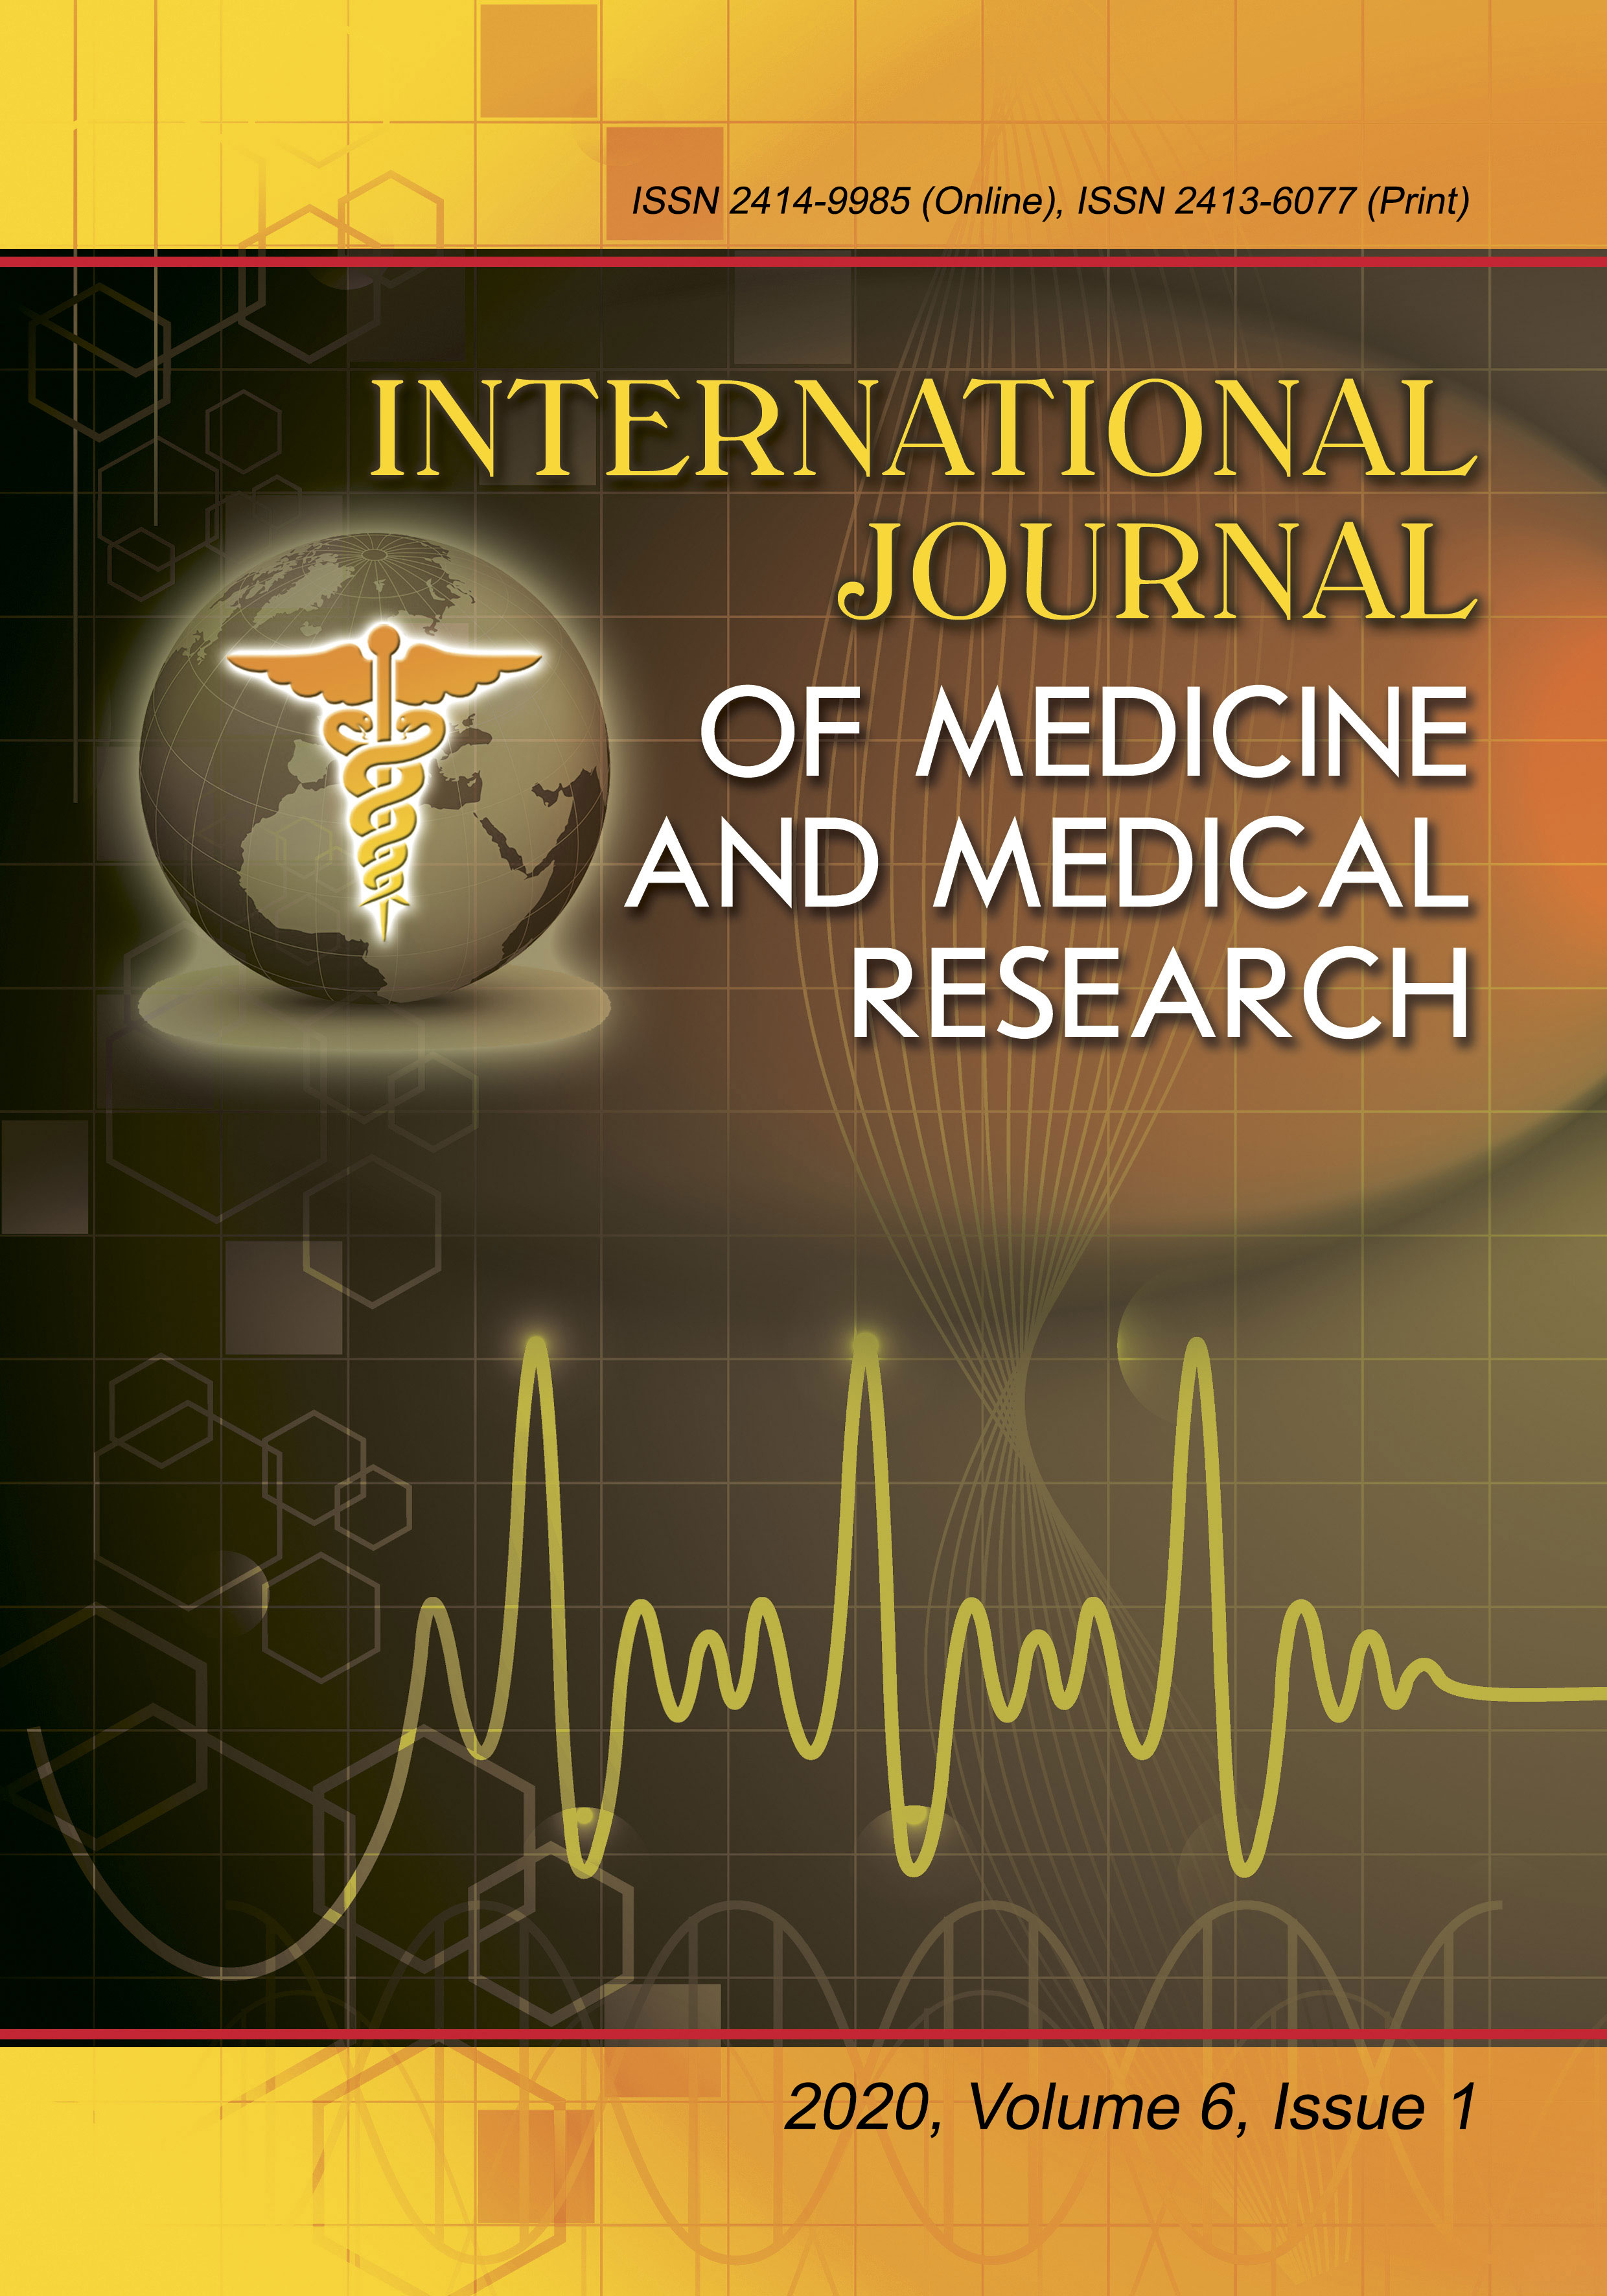 					View Vol. 6 No. 1 (2020): International Journal of Medicine and Medical Research
				